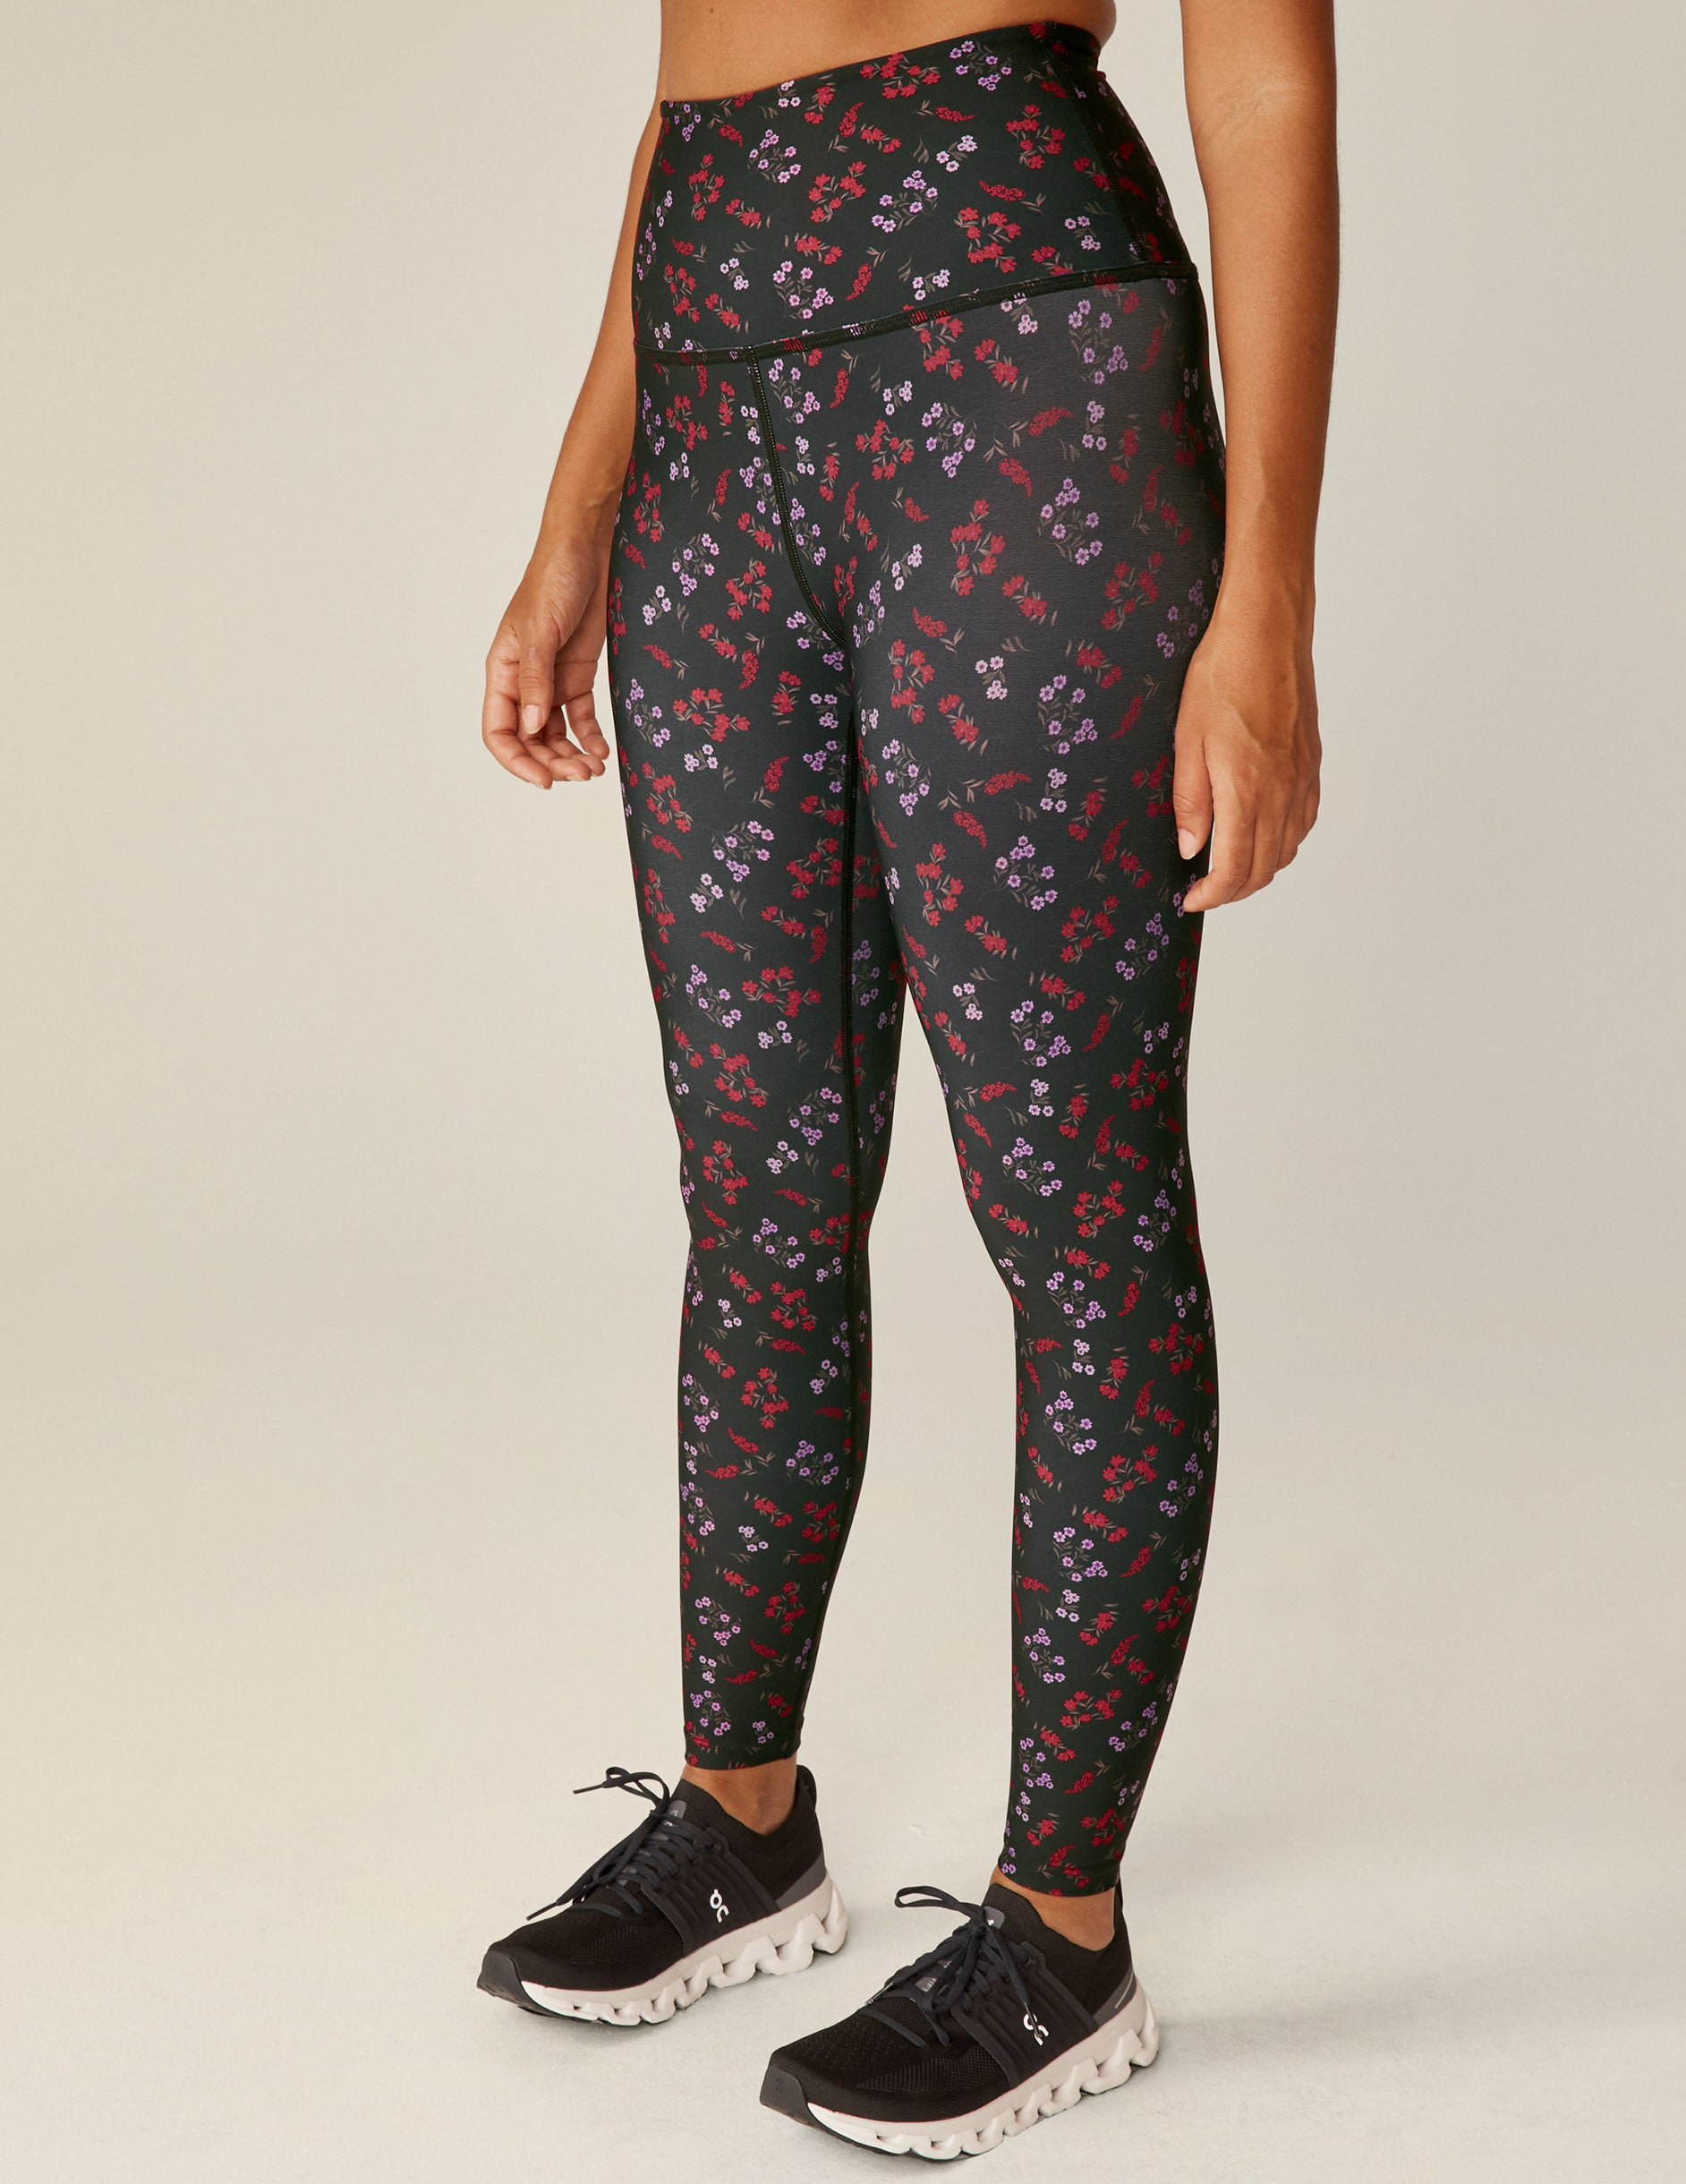 black floral printed (red and purple flowers) high-waisted midi leggings. 